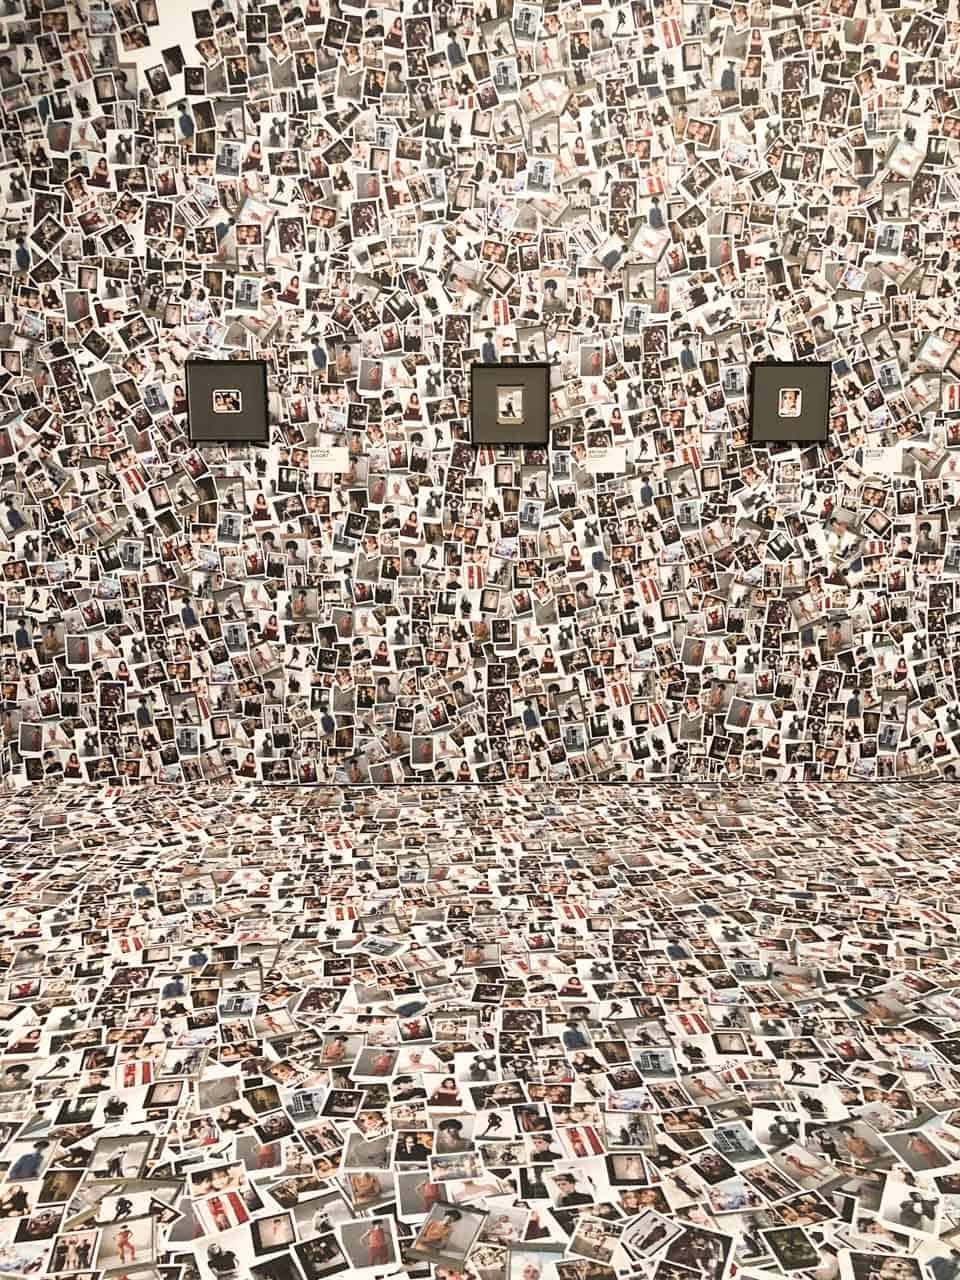 A close-up shot of a room with Polaroid picture stuck to the floor and the walls